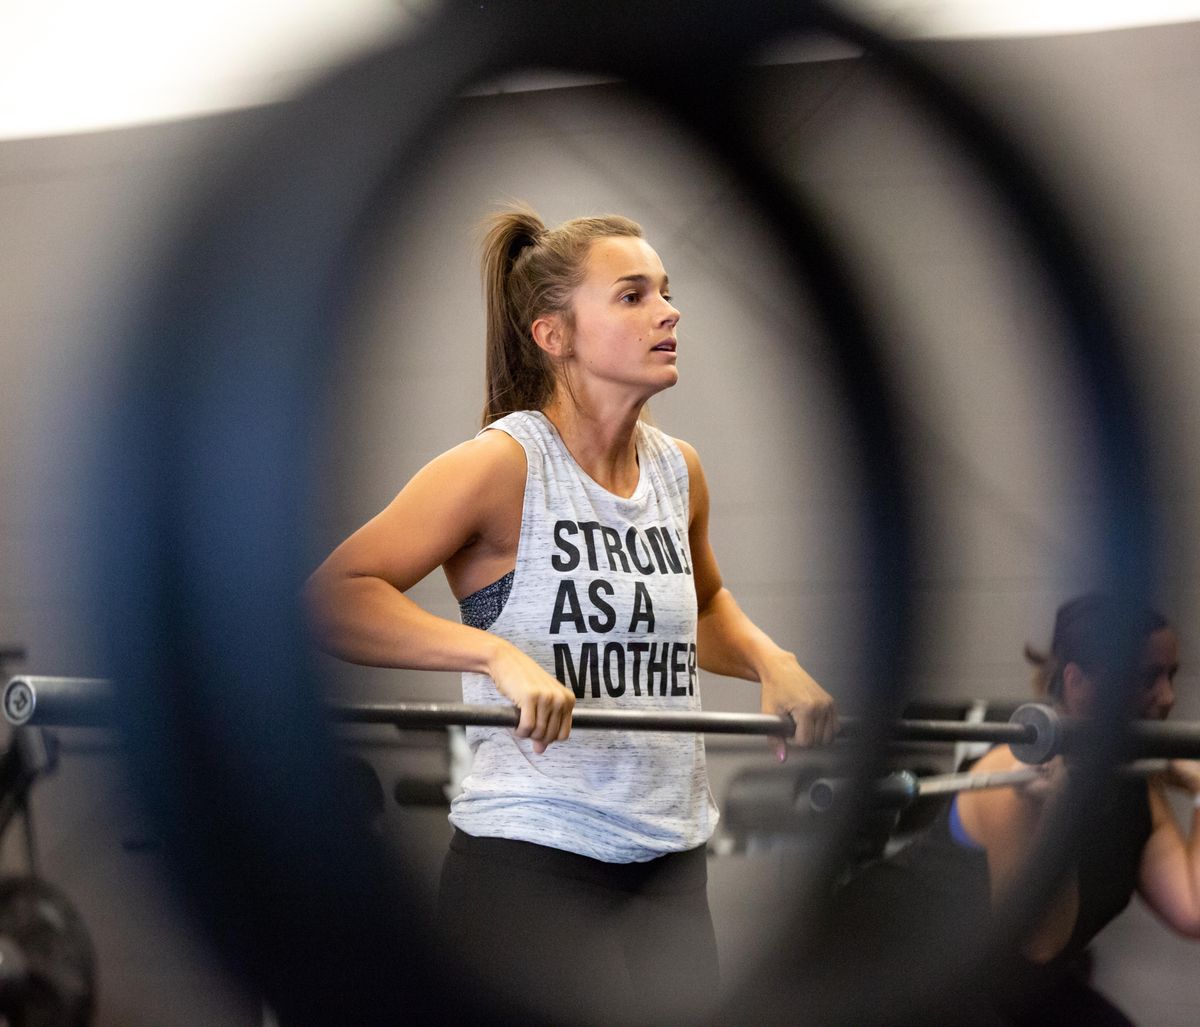 Andrea Bickley faces a mirror while executing a warmup exercise at Farmgirlfit in Spokane on the morning of Aug. 17, 2018. Roughly 20 women attended a morning crossfit class that included a rigorous regimen of six front squats with weight, eight burpees, 30 unbroken kettle bell swings and 40 "DU